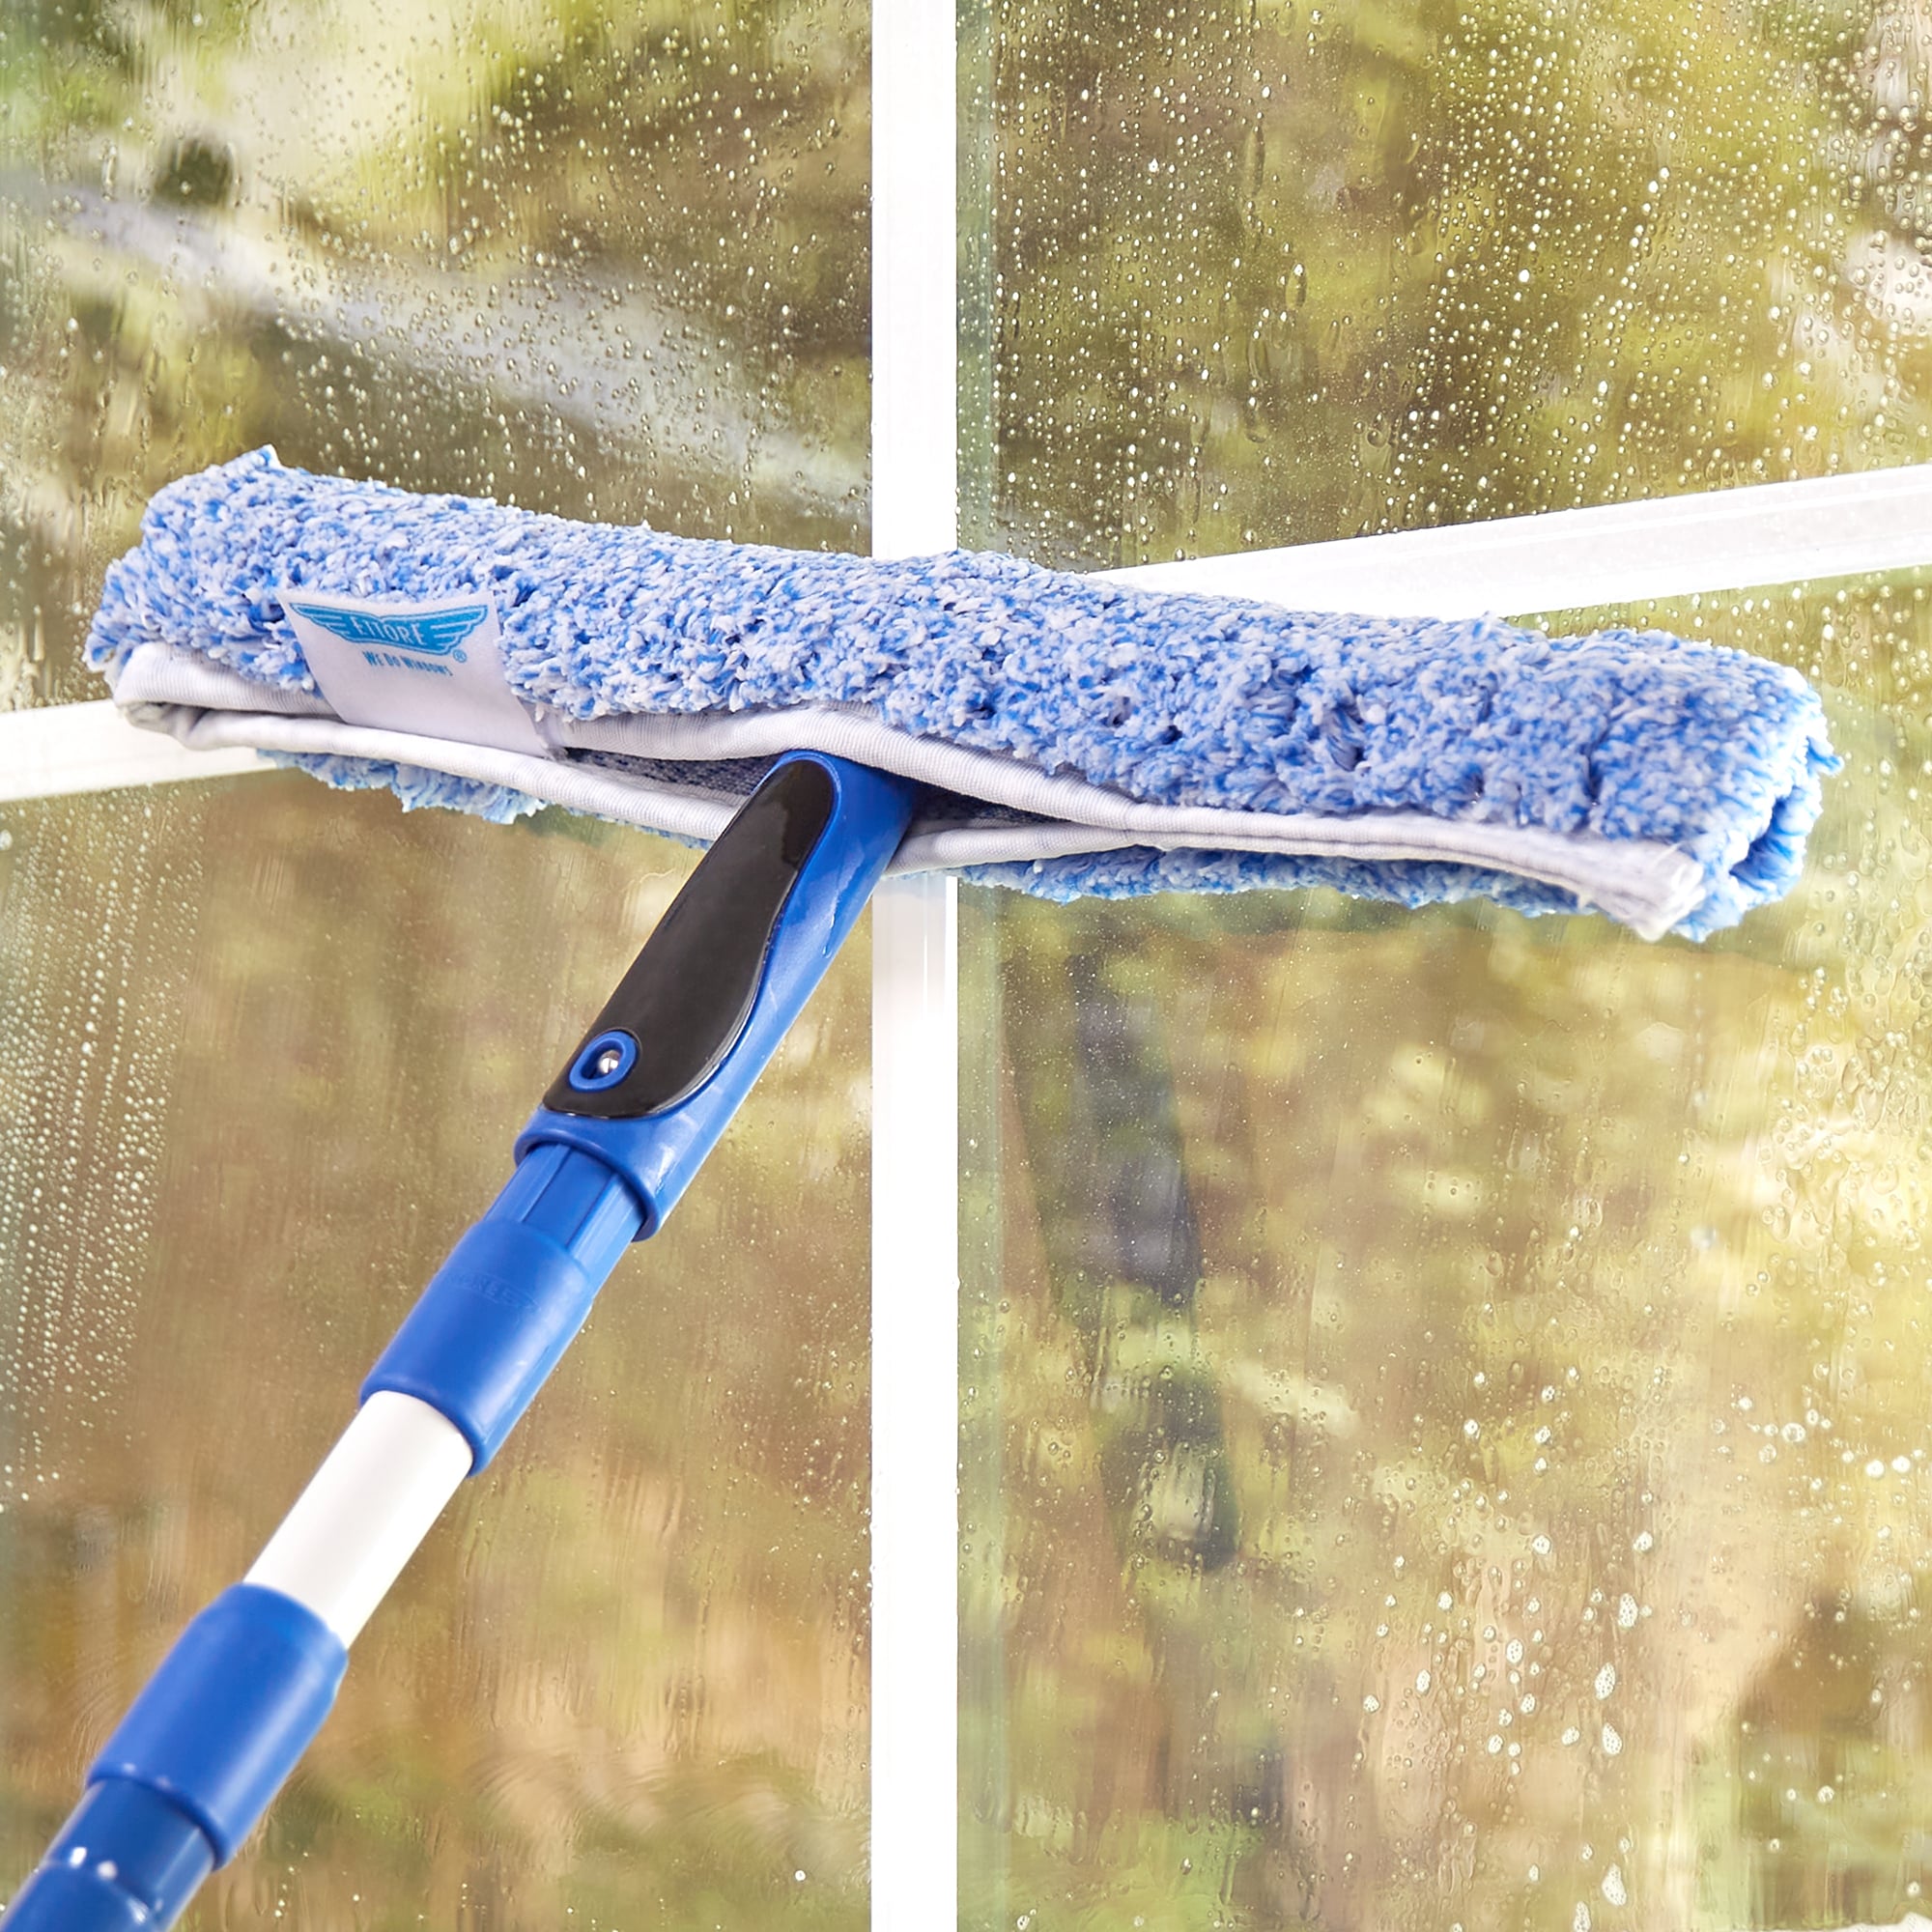 Damp Duster Scrub Daddy Groove Brushes For Cleaning Window Cleaning Brush 